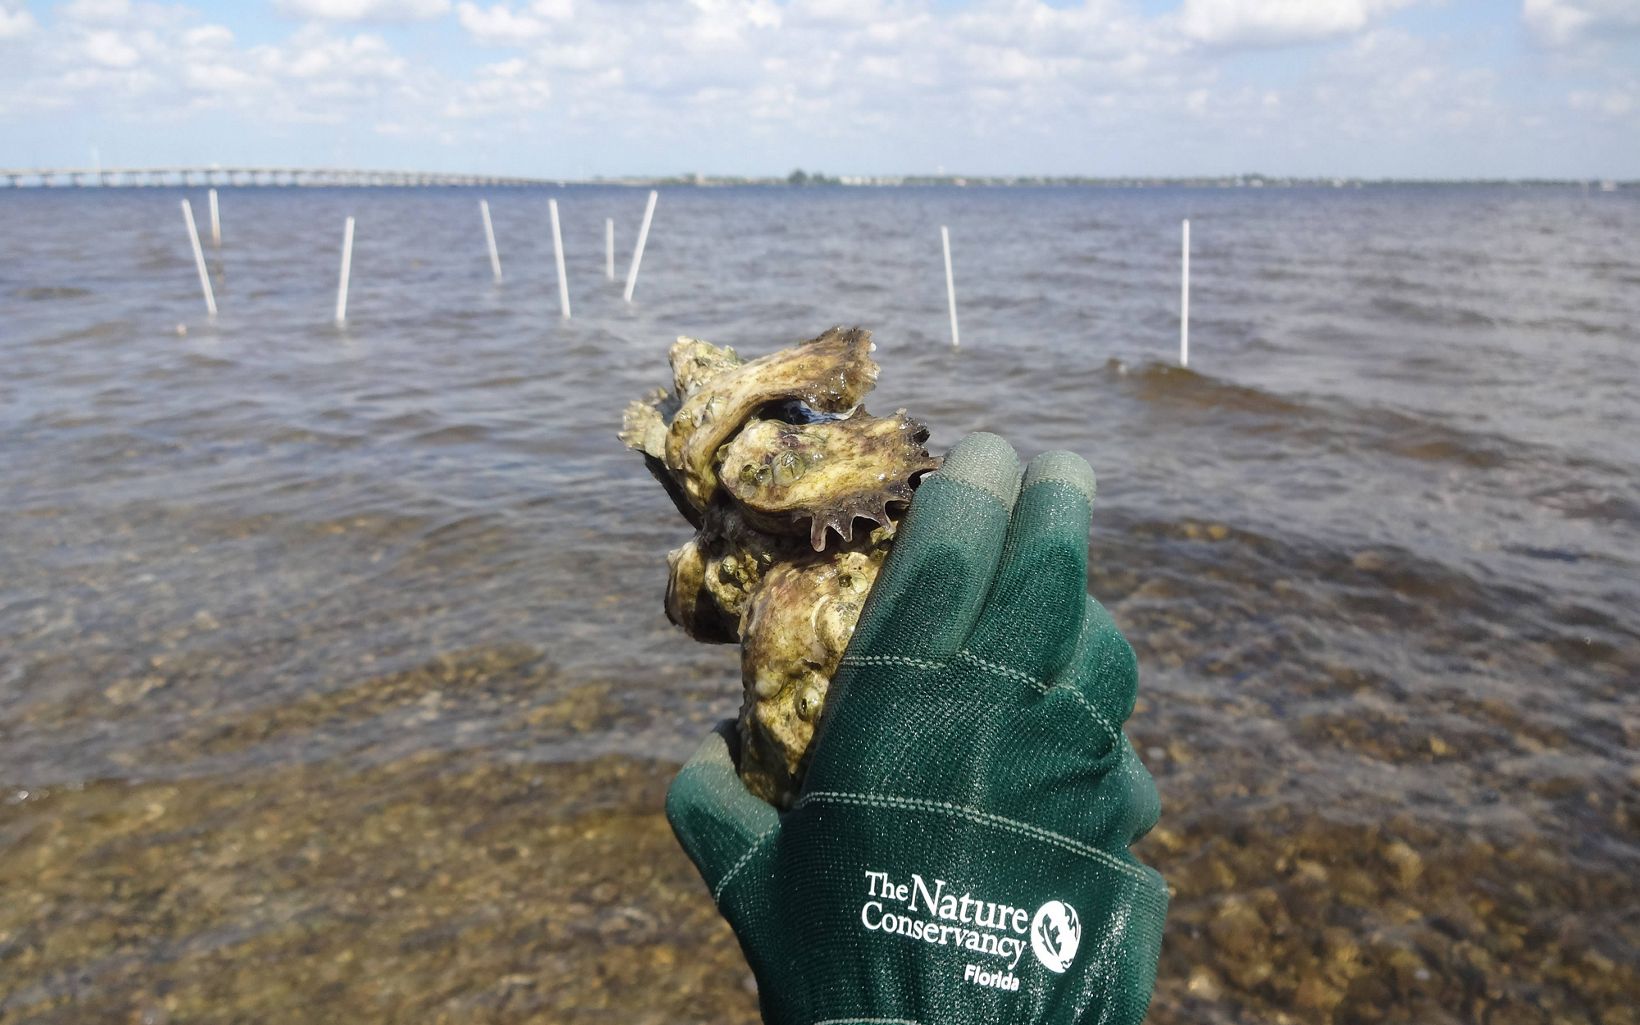 Eastern Oyster The goal of TNC's oyster reef efforts is to restore this important species to Pensacola Bay.  © Anne Birch